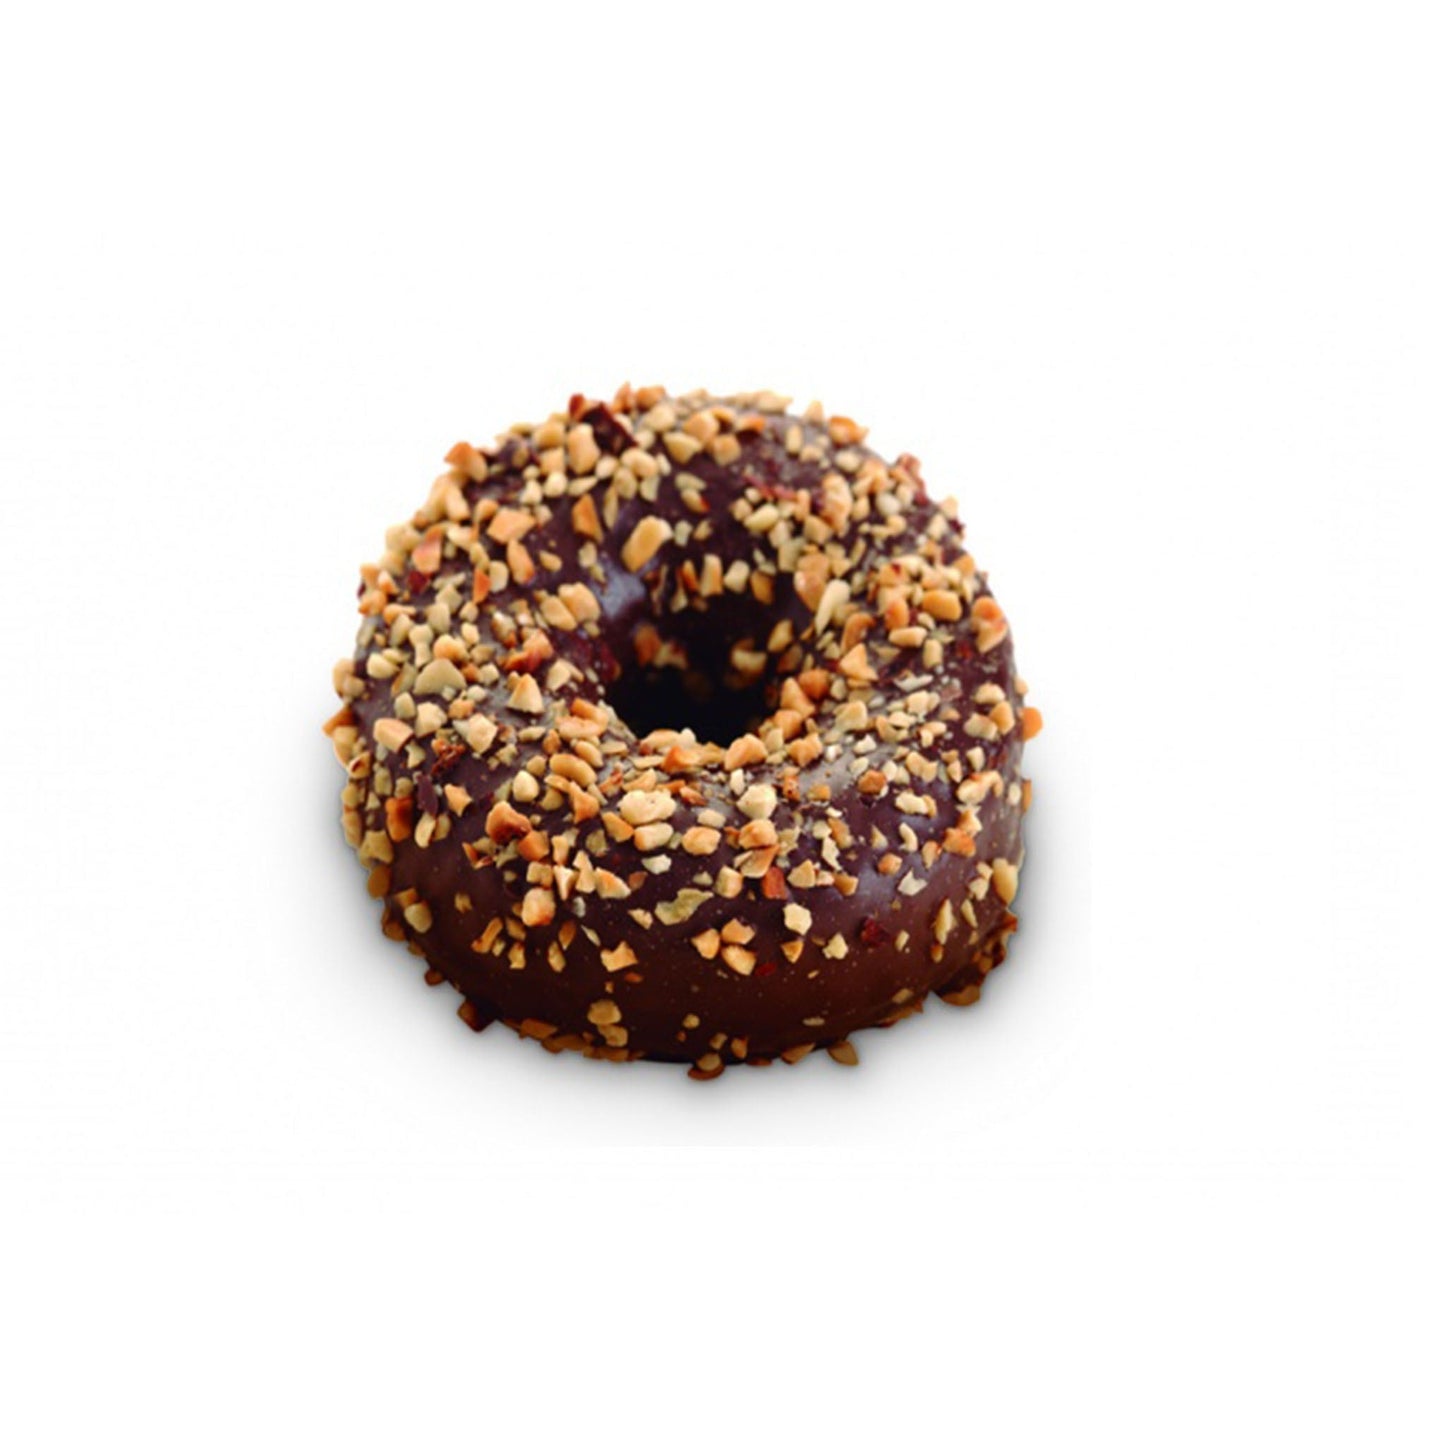 Chocolate Coated Donuts Topped with Hazelnut Crumbles